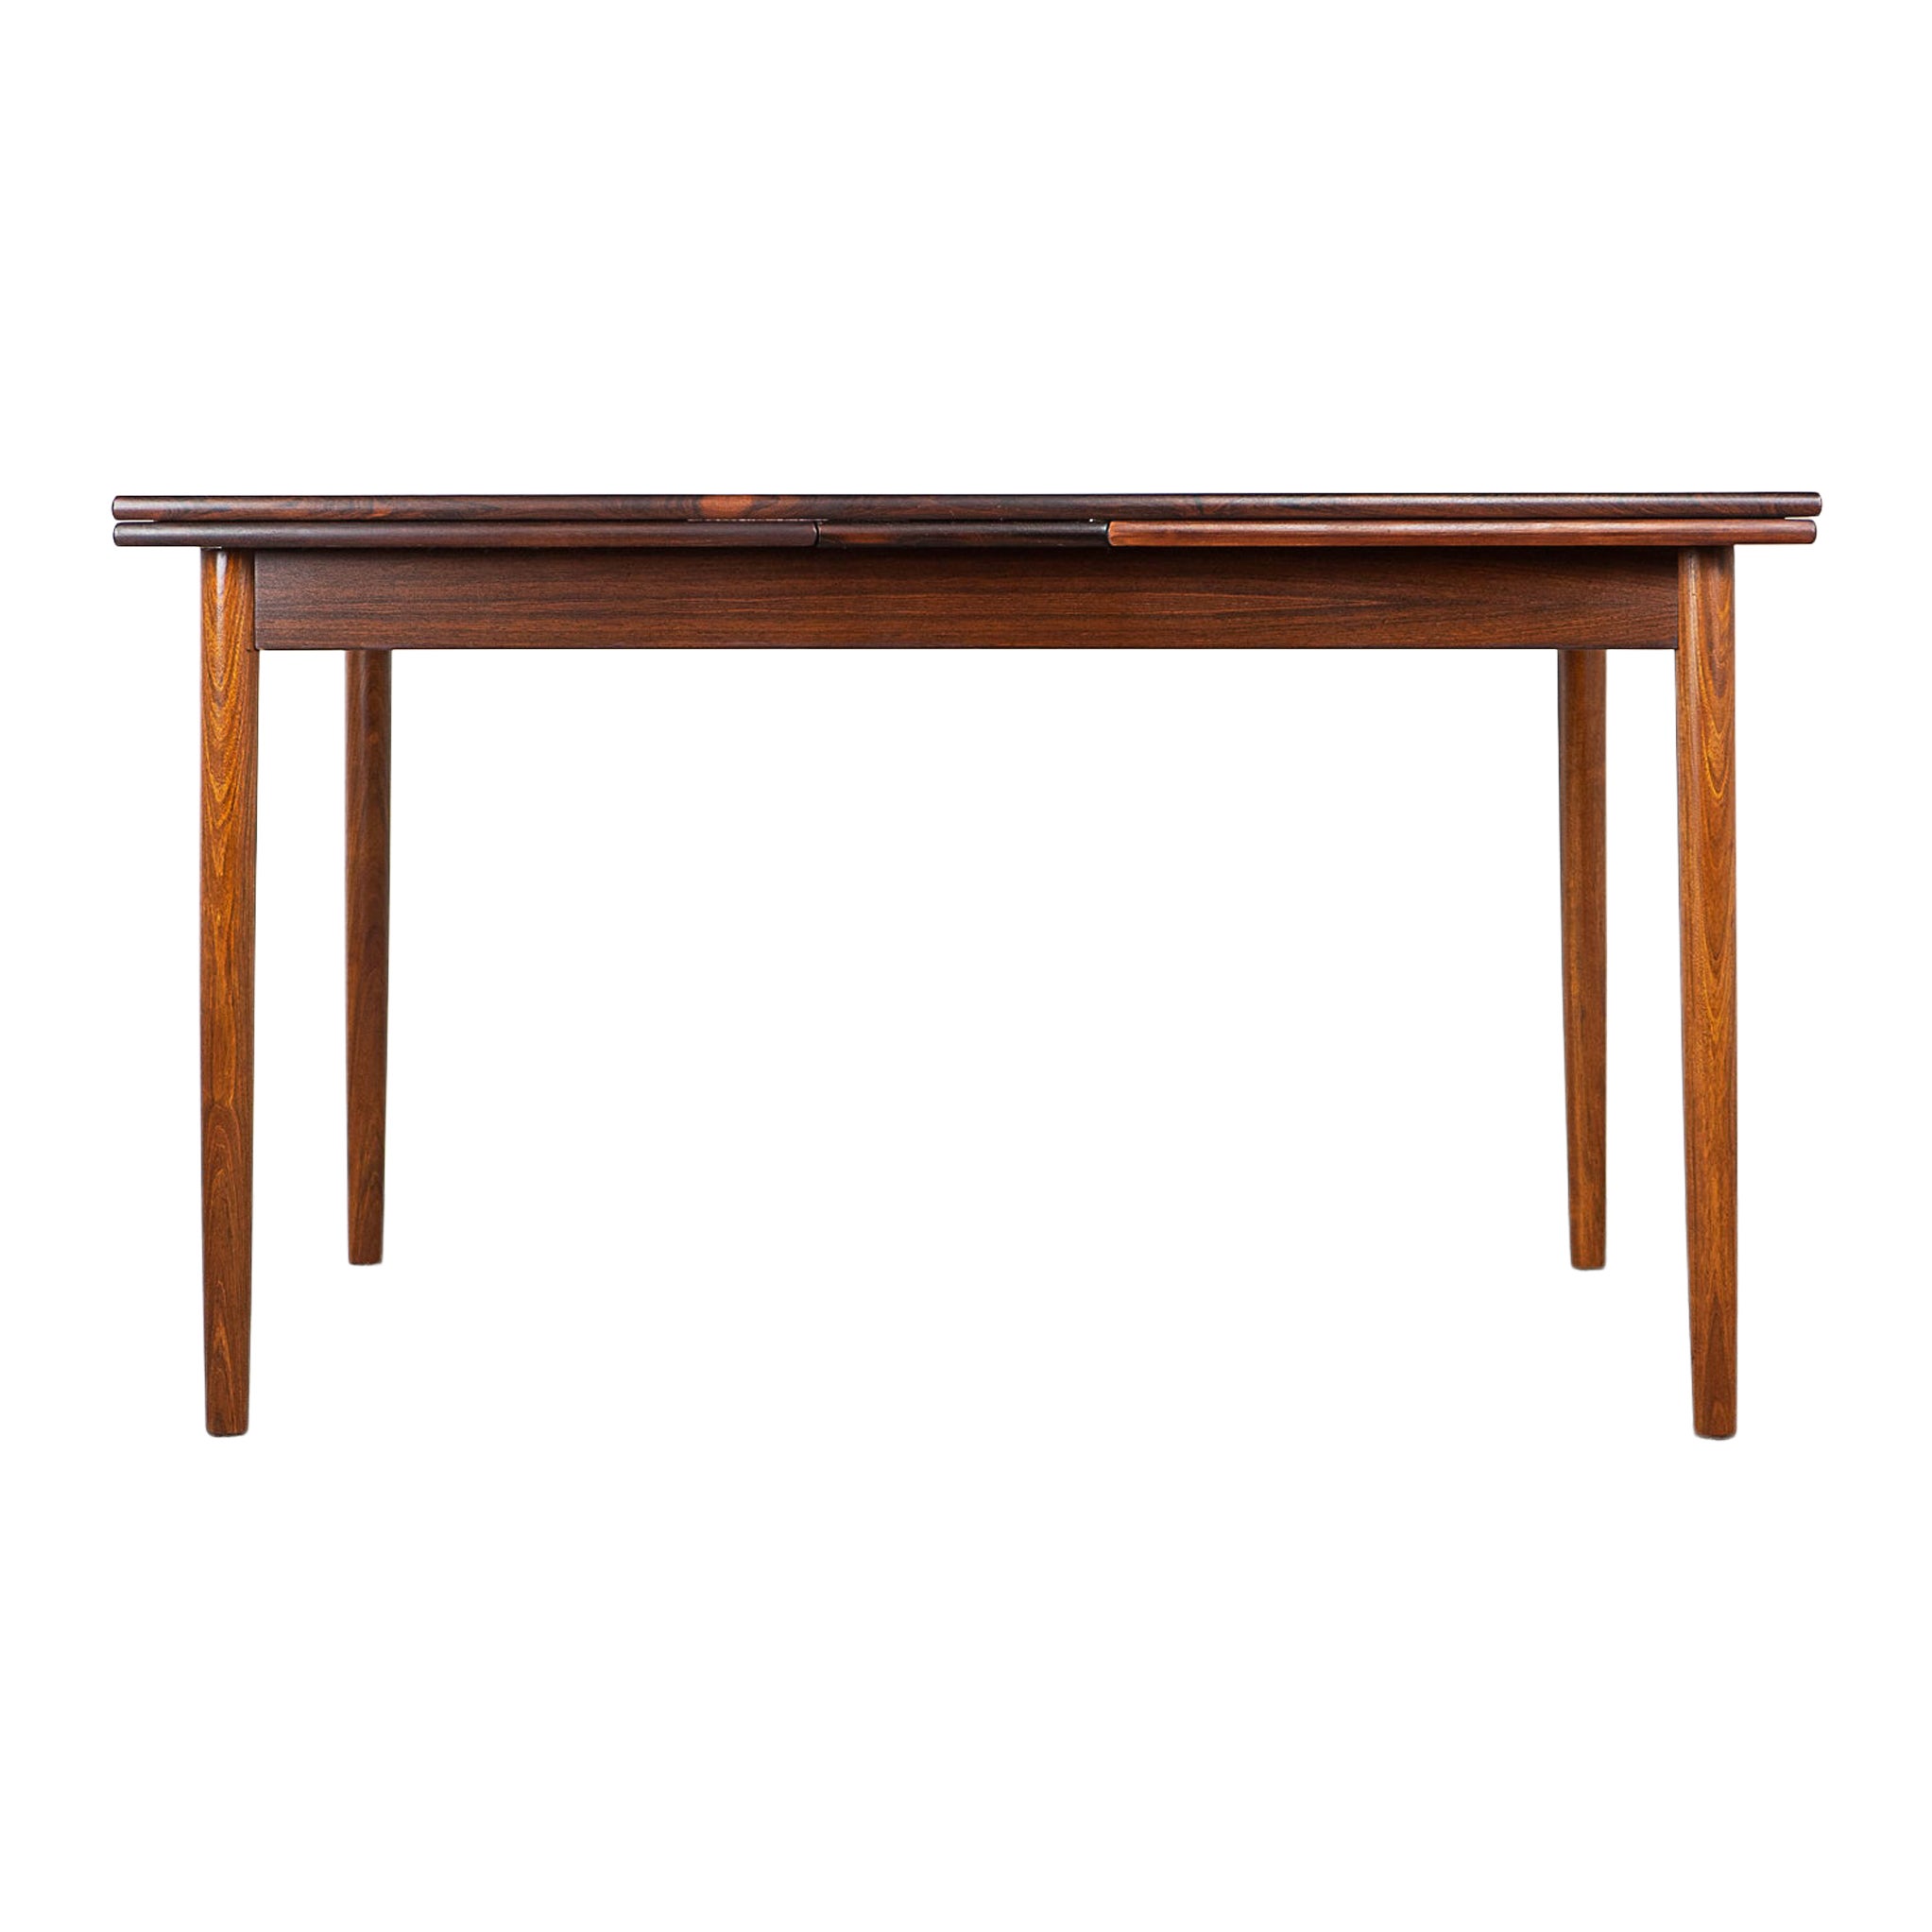 What is the best shape table for a small dining room?